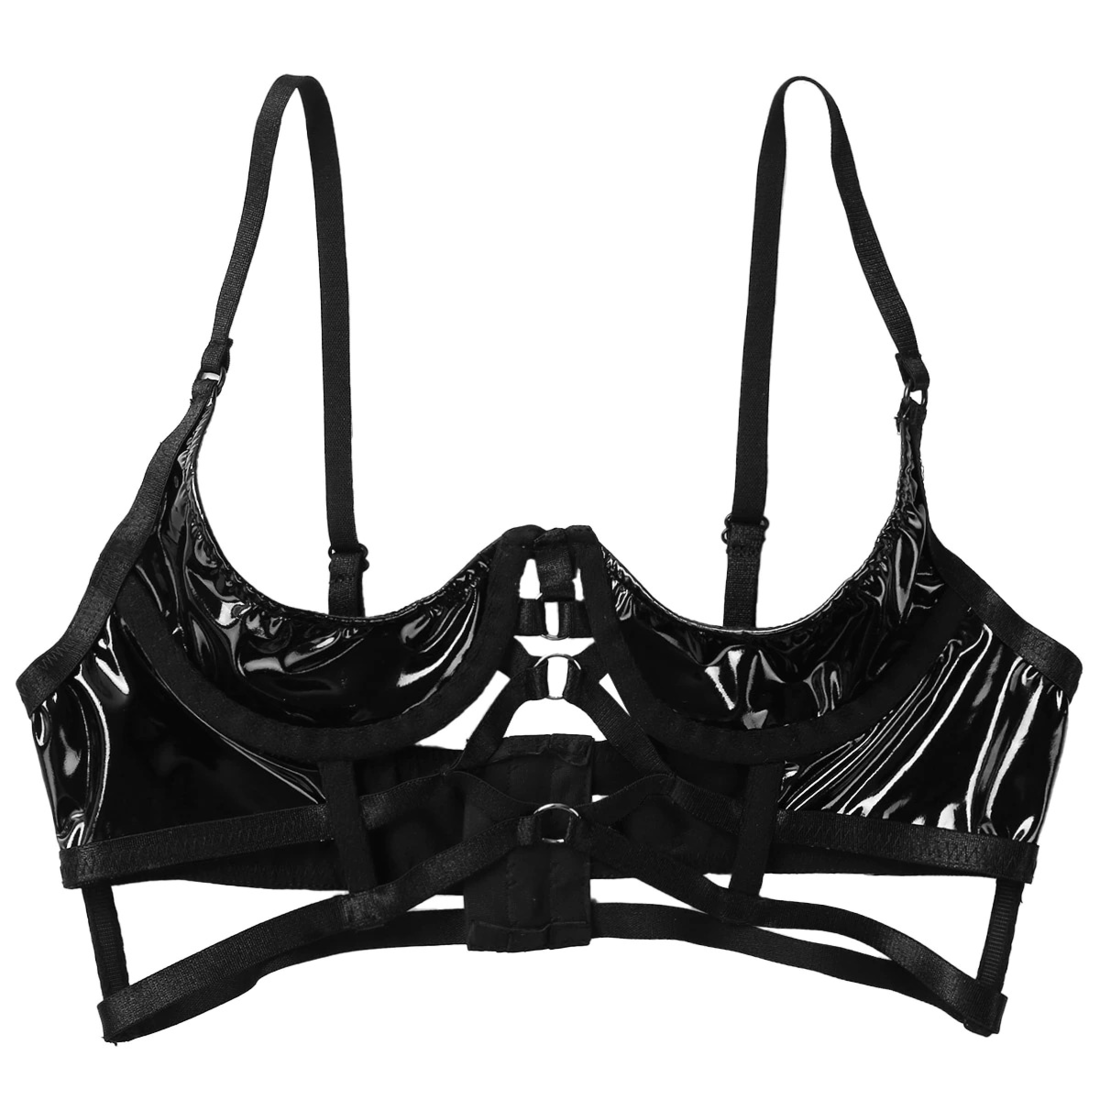 Women's Sexy Bustier with Open Cup / Adjustable Straps Erotic Bra in Black Color - HARD'N'HEAVY